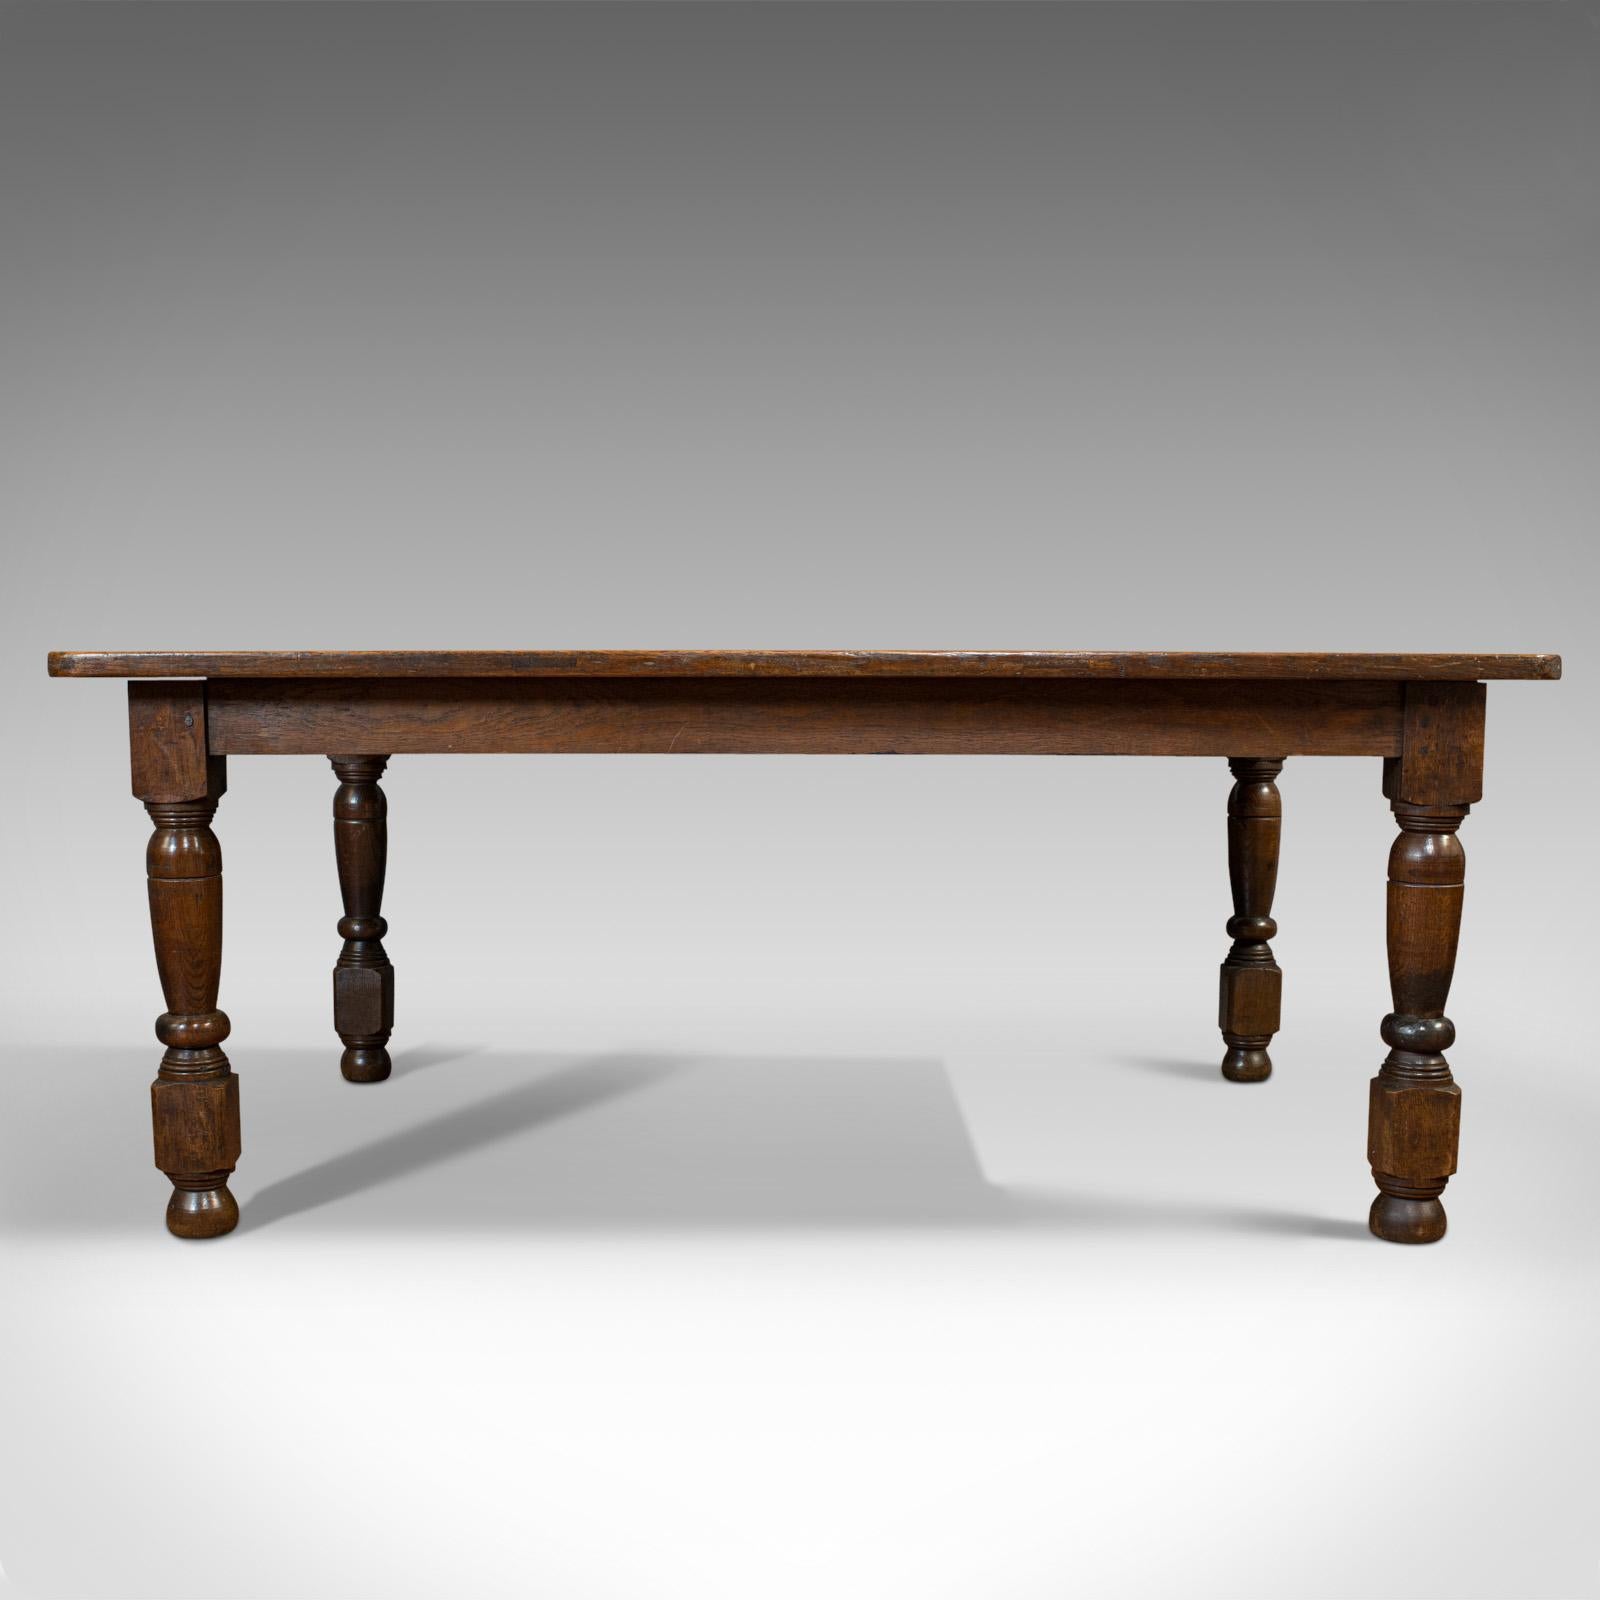 This is an antique dining table. An English, oak 6 seat centre table of country house proportion, dating to the late Victorian period, circa 1900.

Of useful size and with quality parquetry finish
Displays a desirable aged patina
Select oak